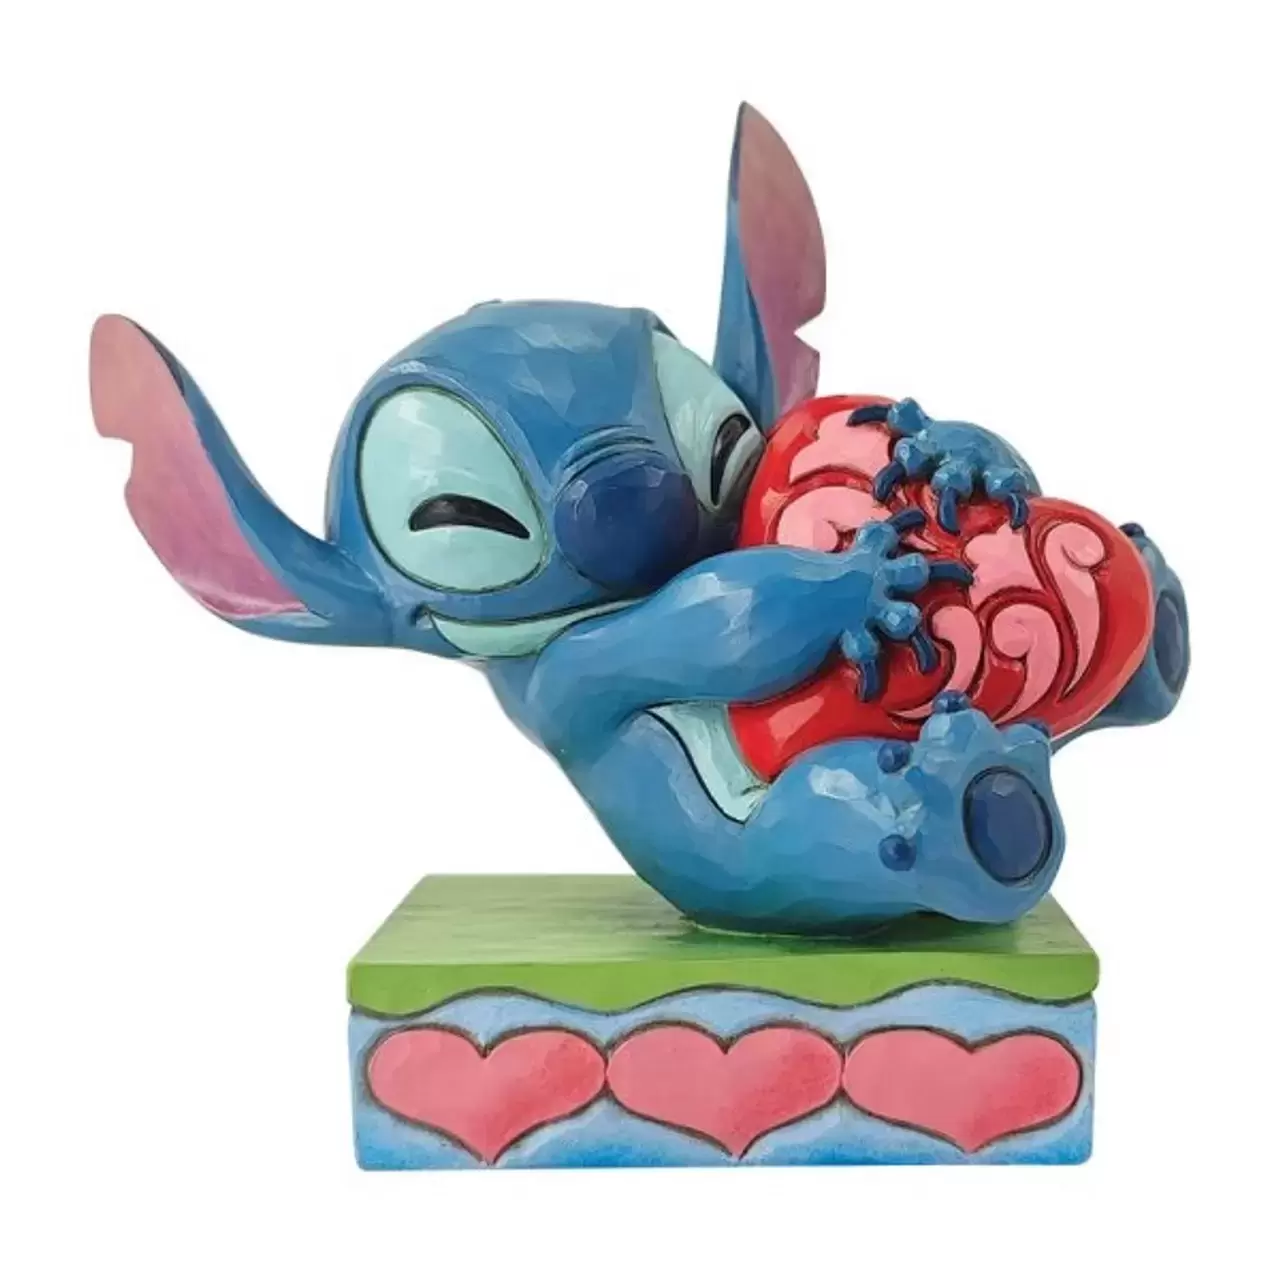 Disney Traditions by Jim Shore - Stitch Hugging a Heart